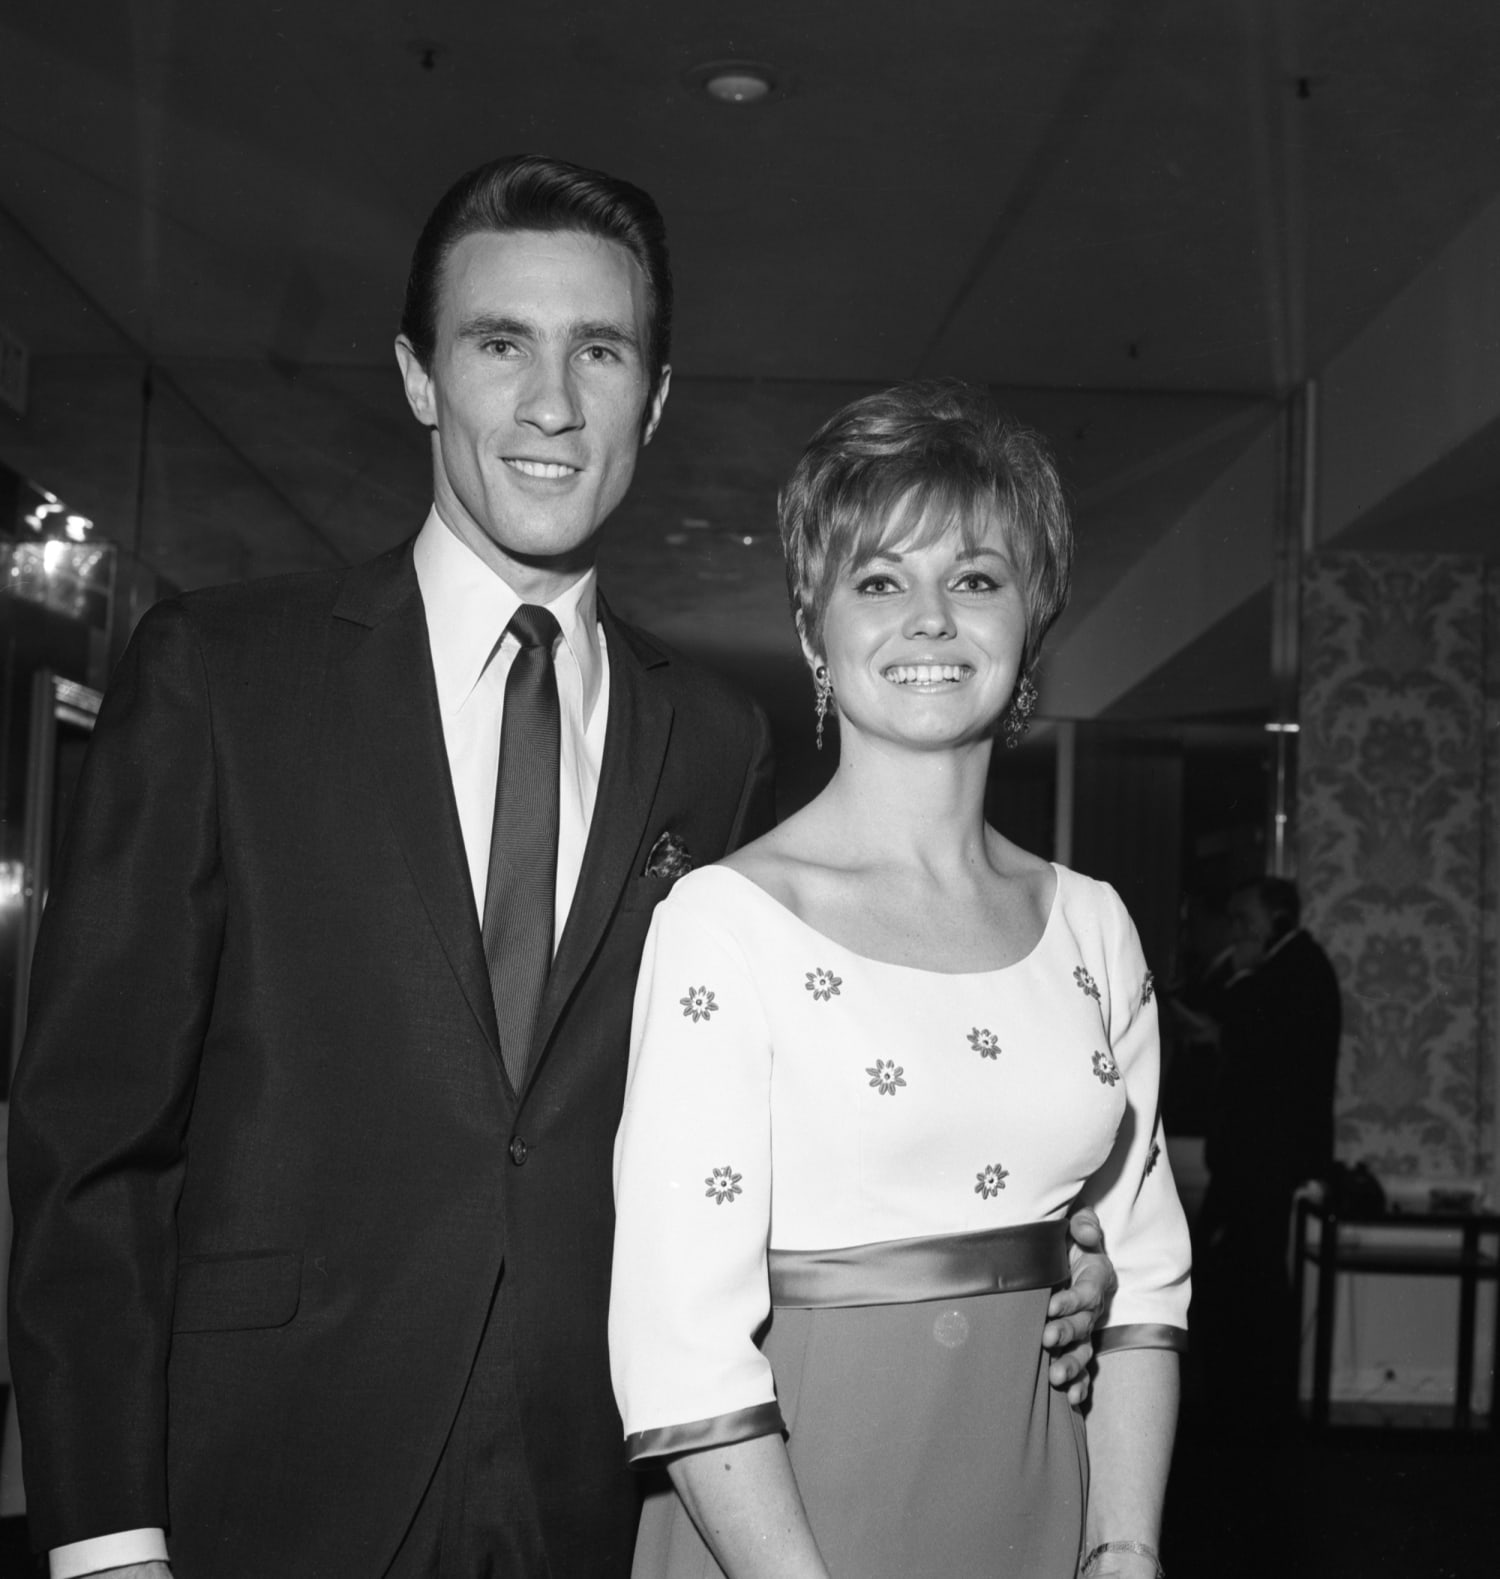 Murder of Righteous Brothers Singers Ex-Wife Karen Klaas Solved 40 Years Later